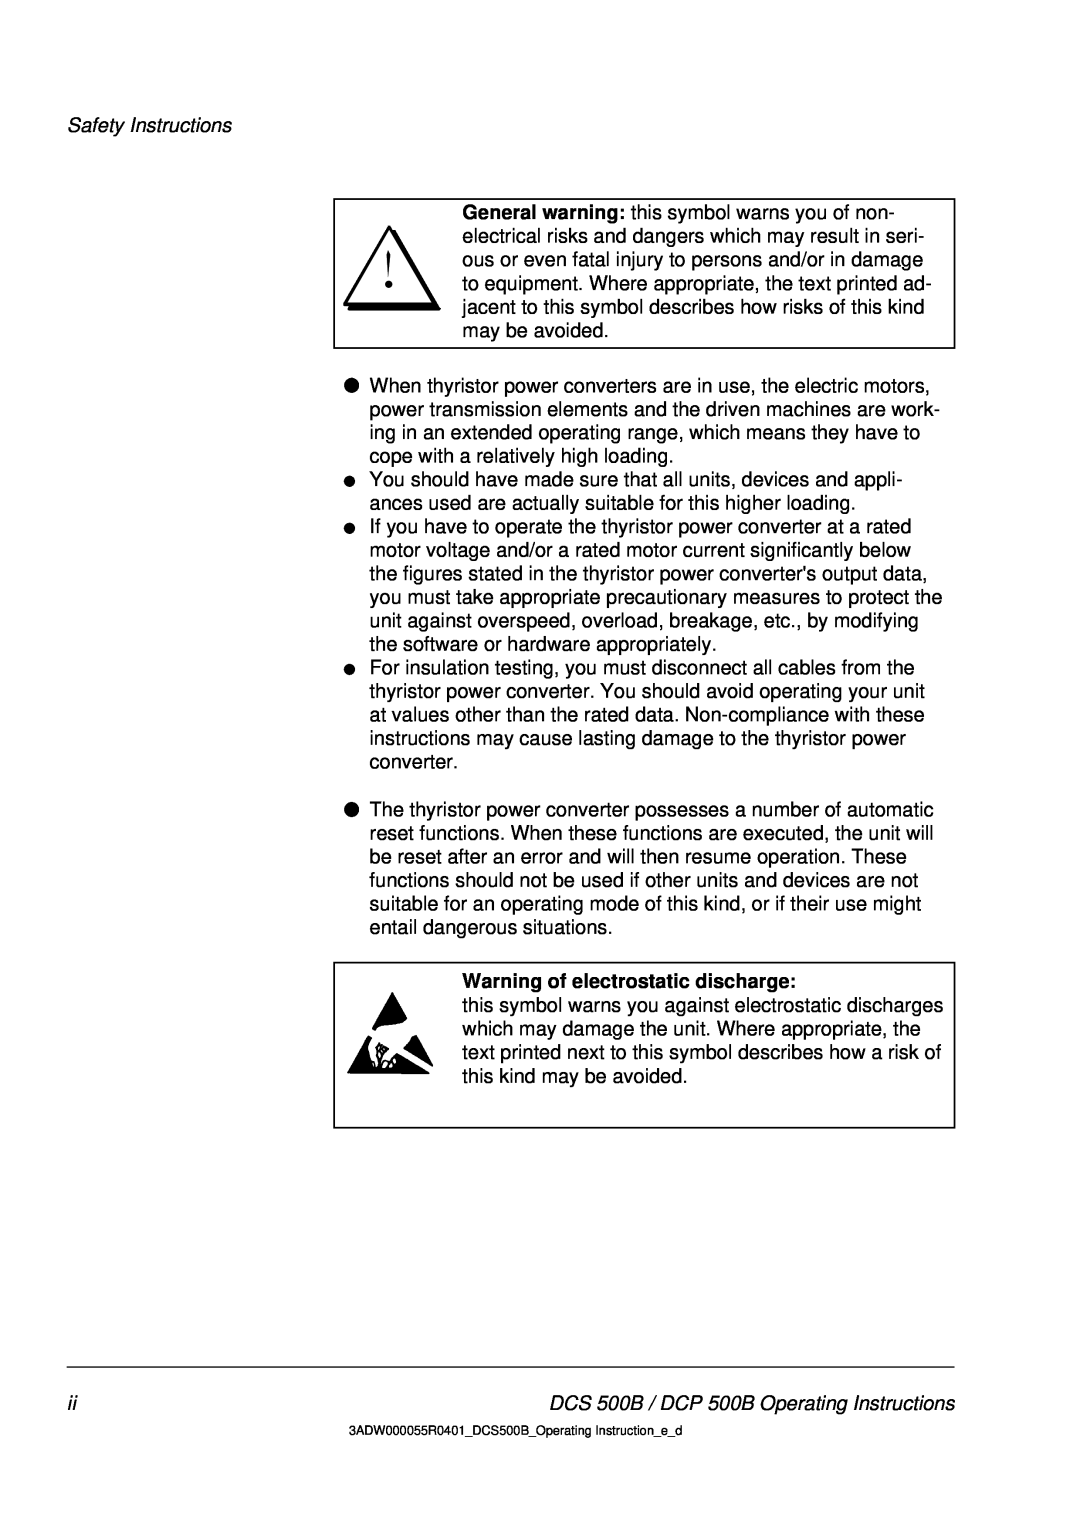 DCS 500 manual Safety Instructions, Warning of electrostatic discharge 